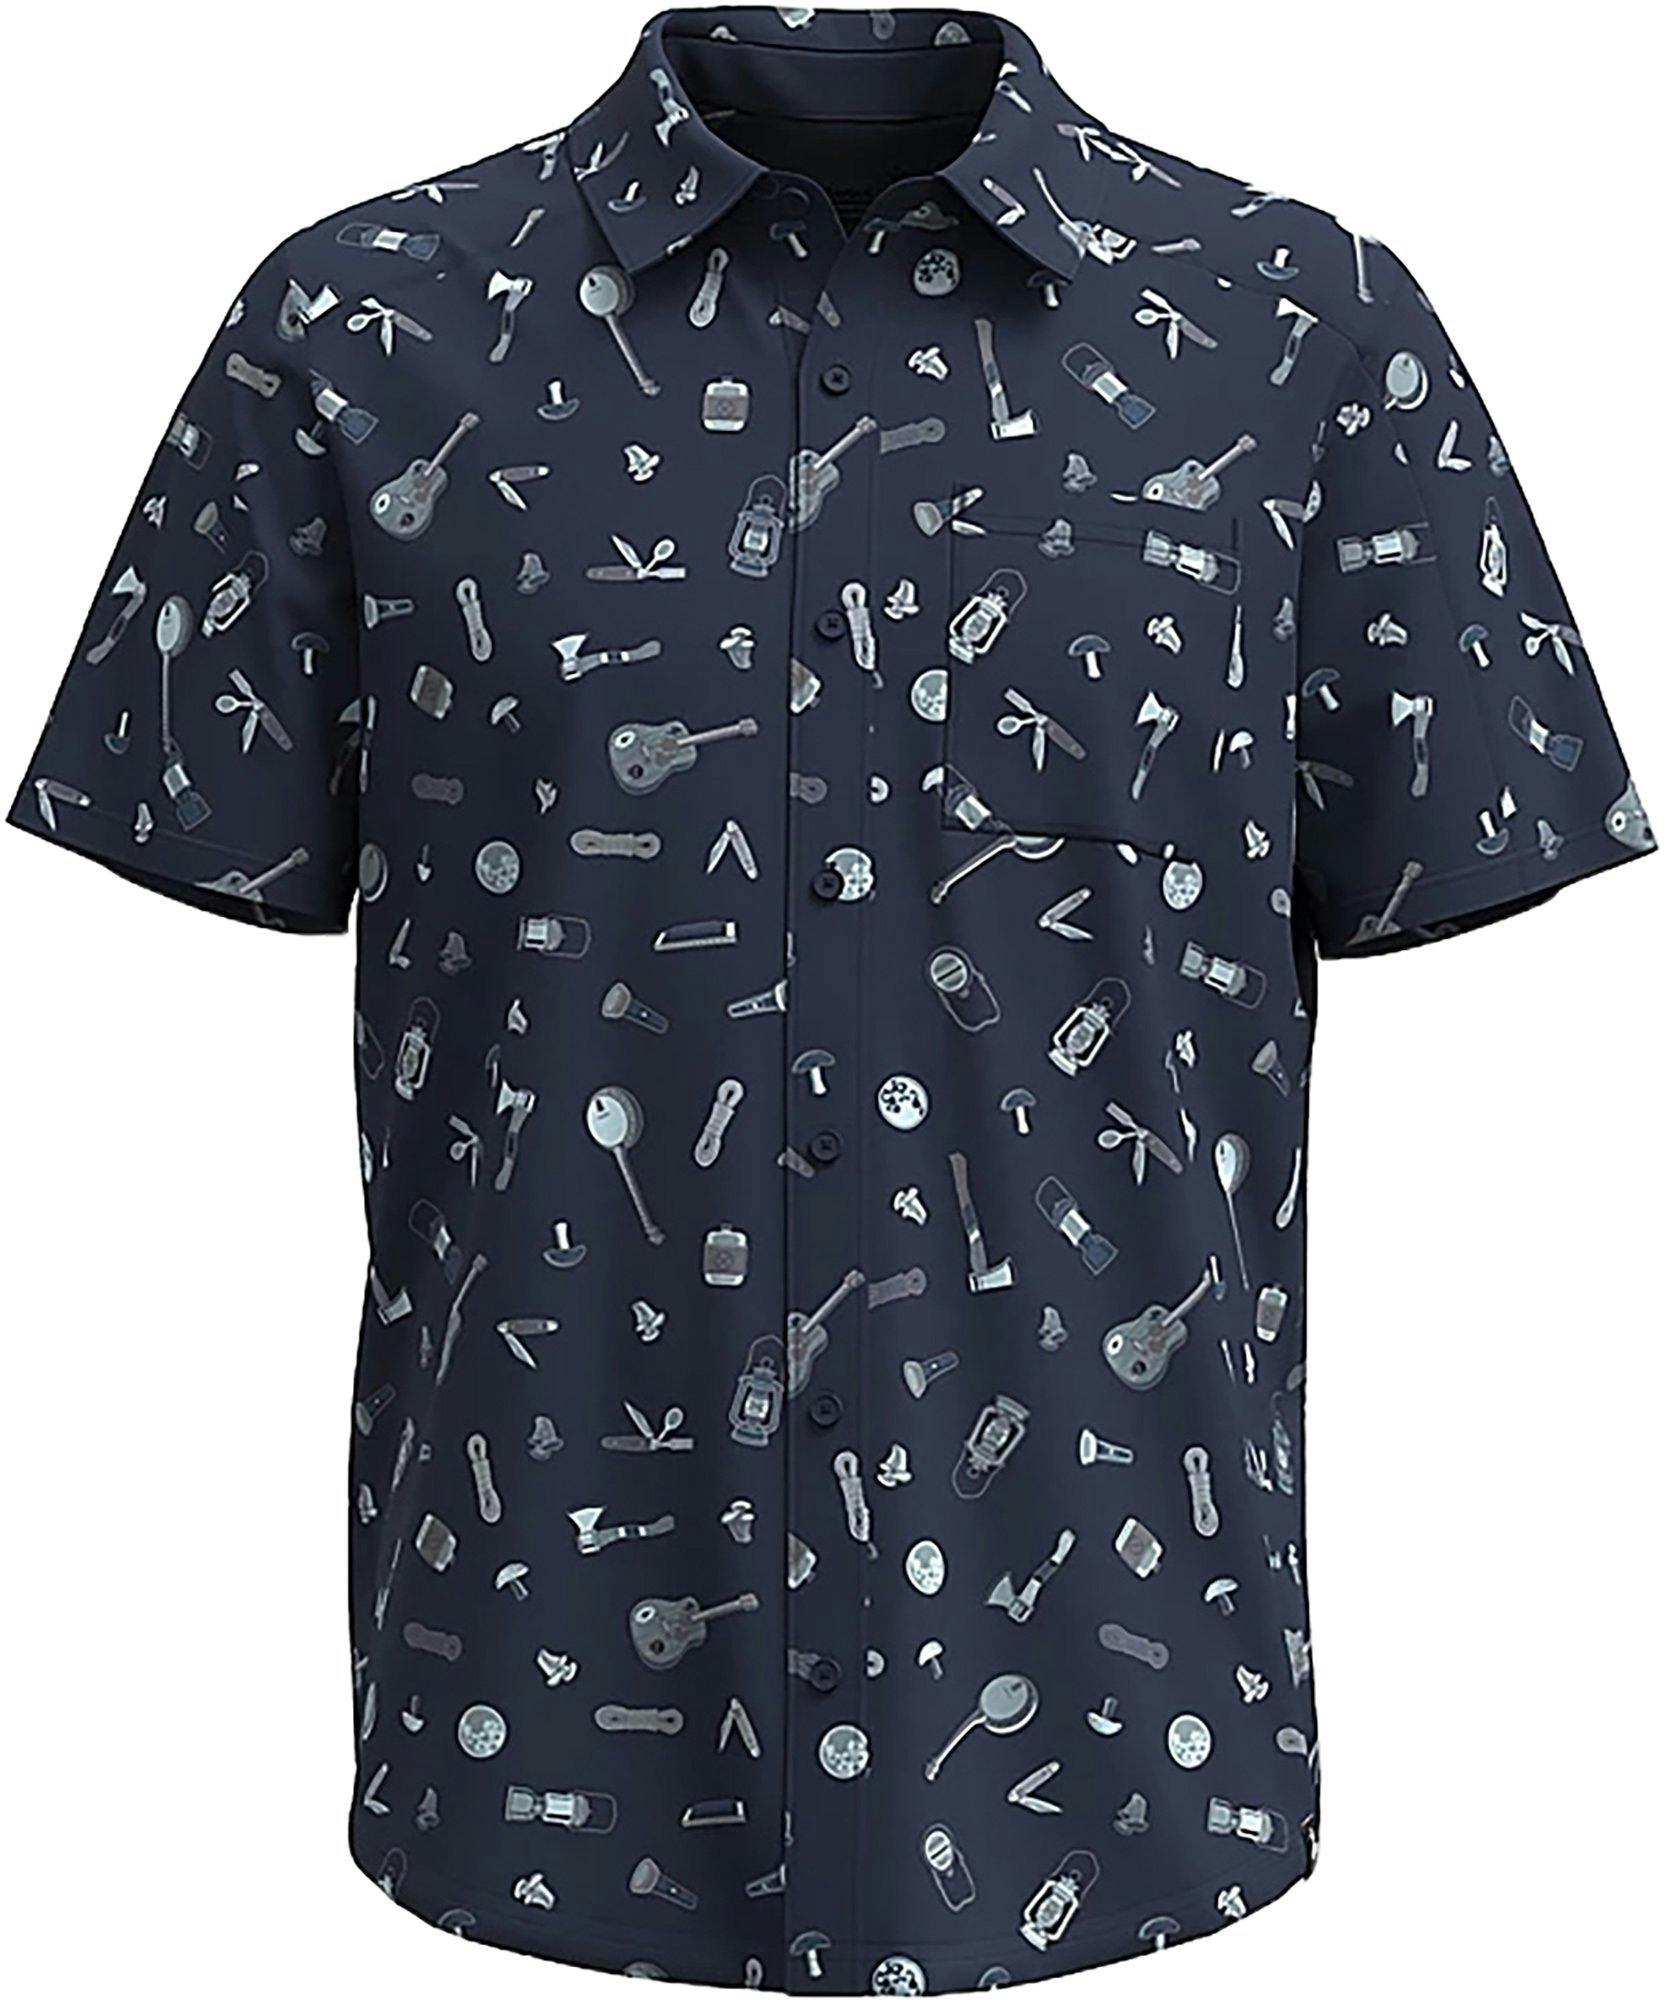 Product image for Printed Short Sleeve Button Down Shirt - Men's